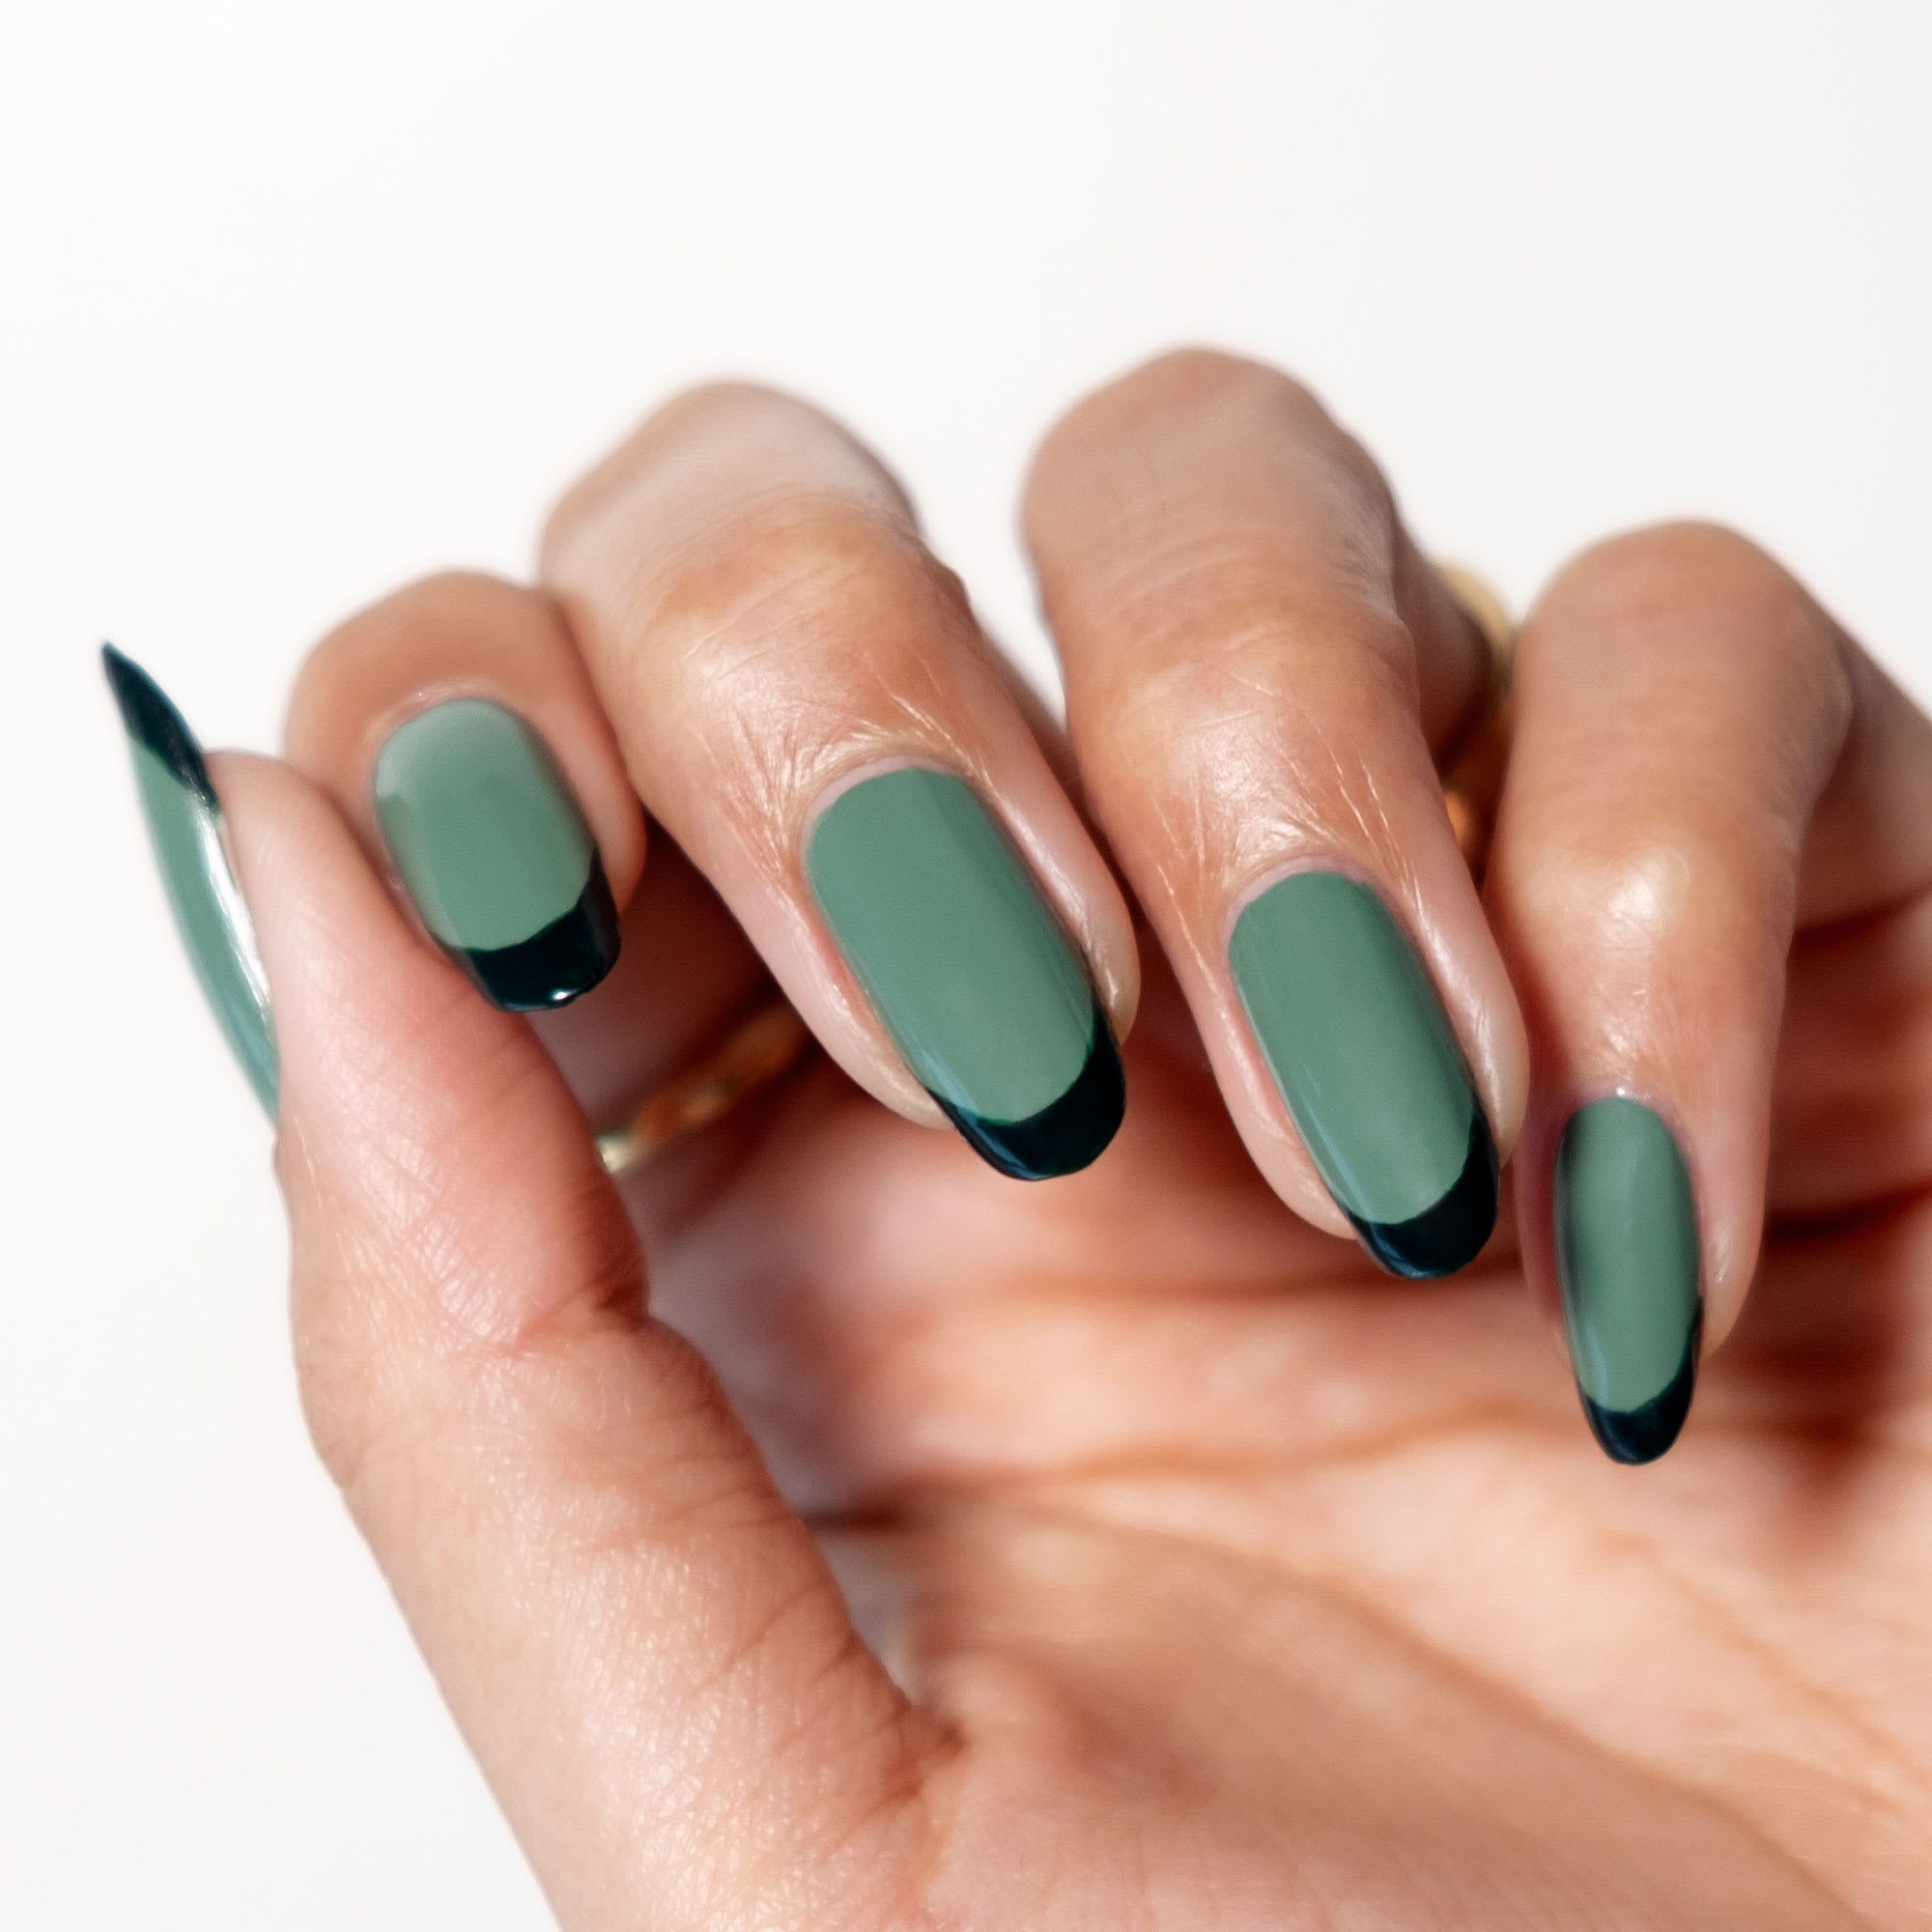 TwoTone Green Nails are the Fall French Mani You've Got to Try Lulus